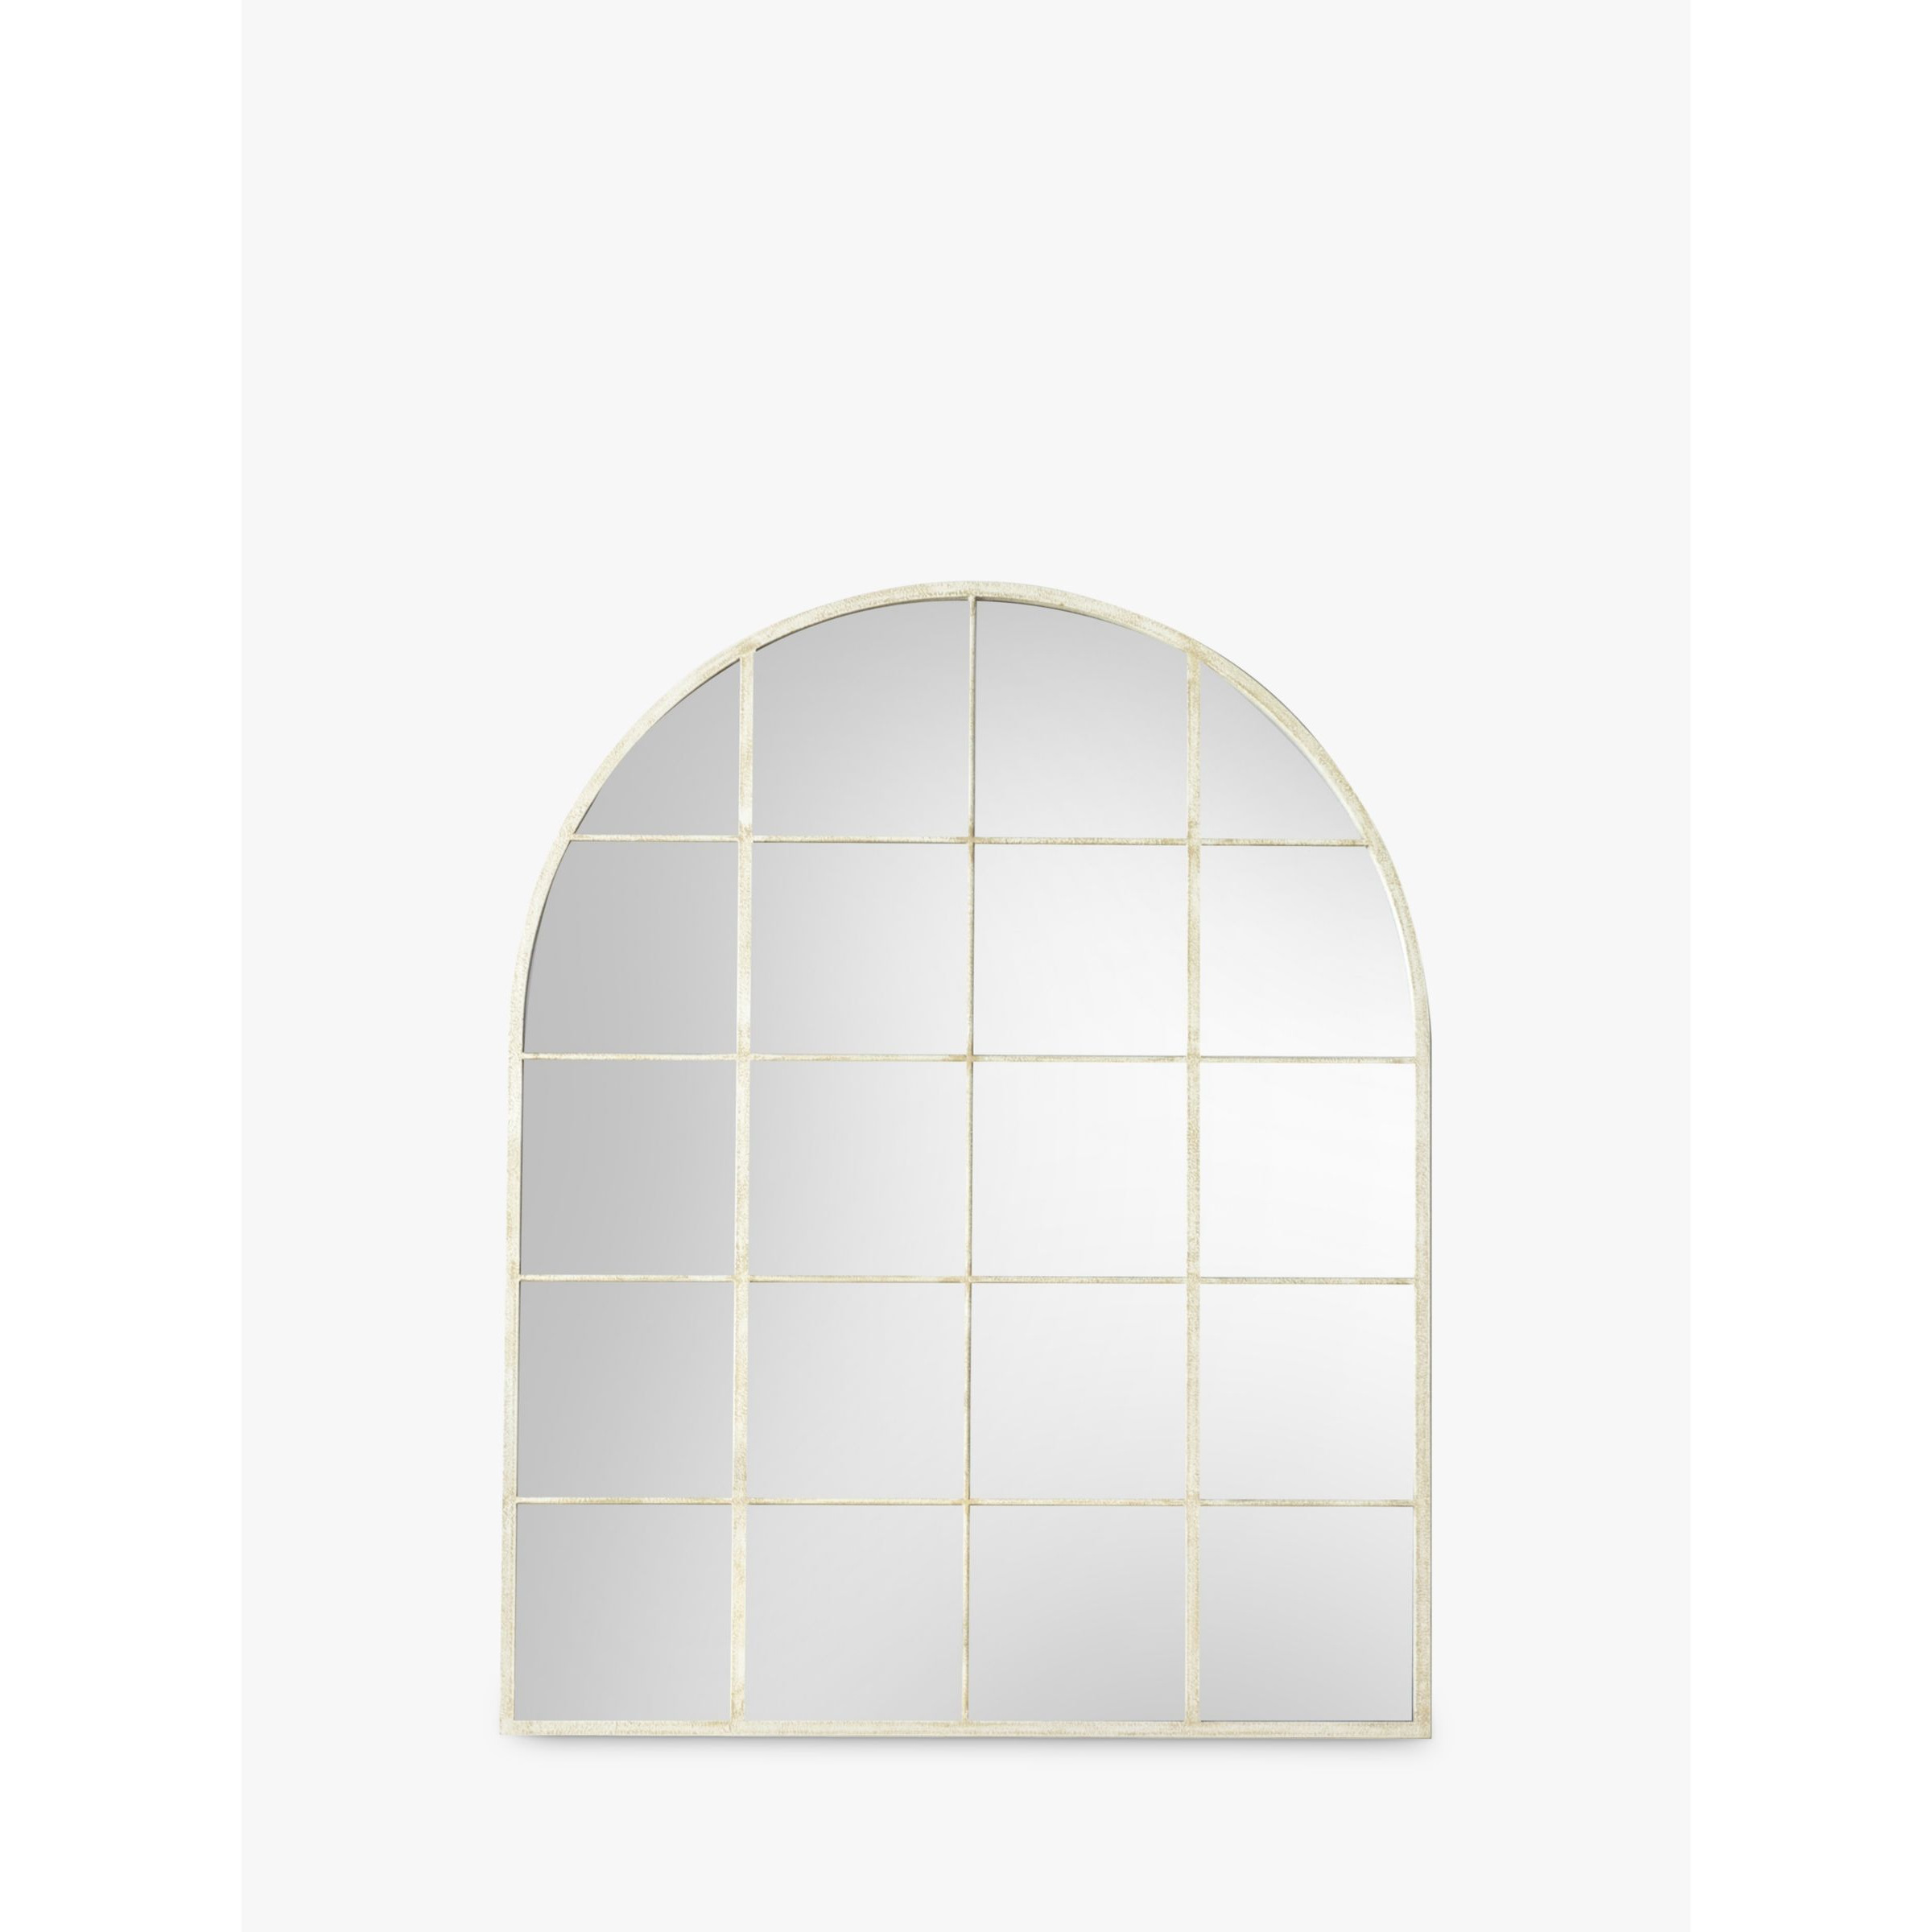 Gallery Direct Davis Arched Metal Frame Window Wall Mirror, 95 x 76cm - image 1